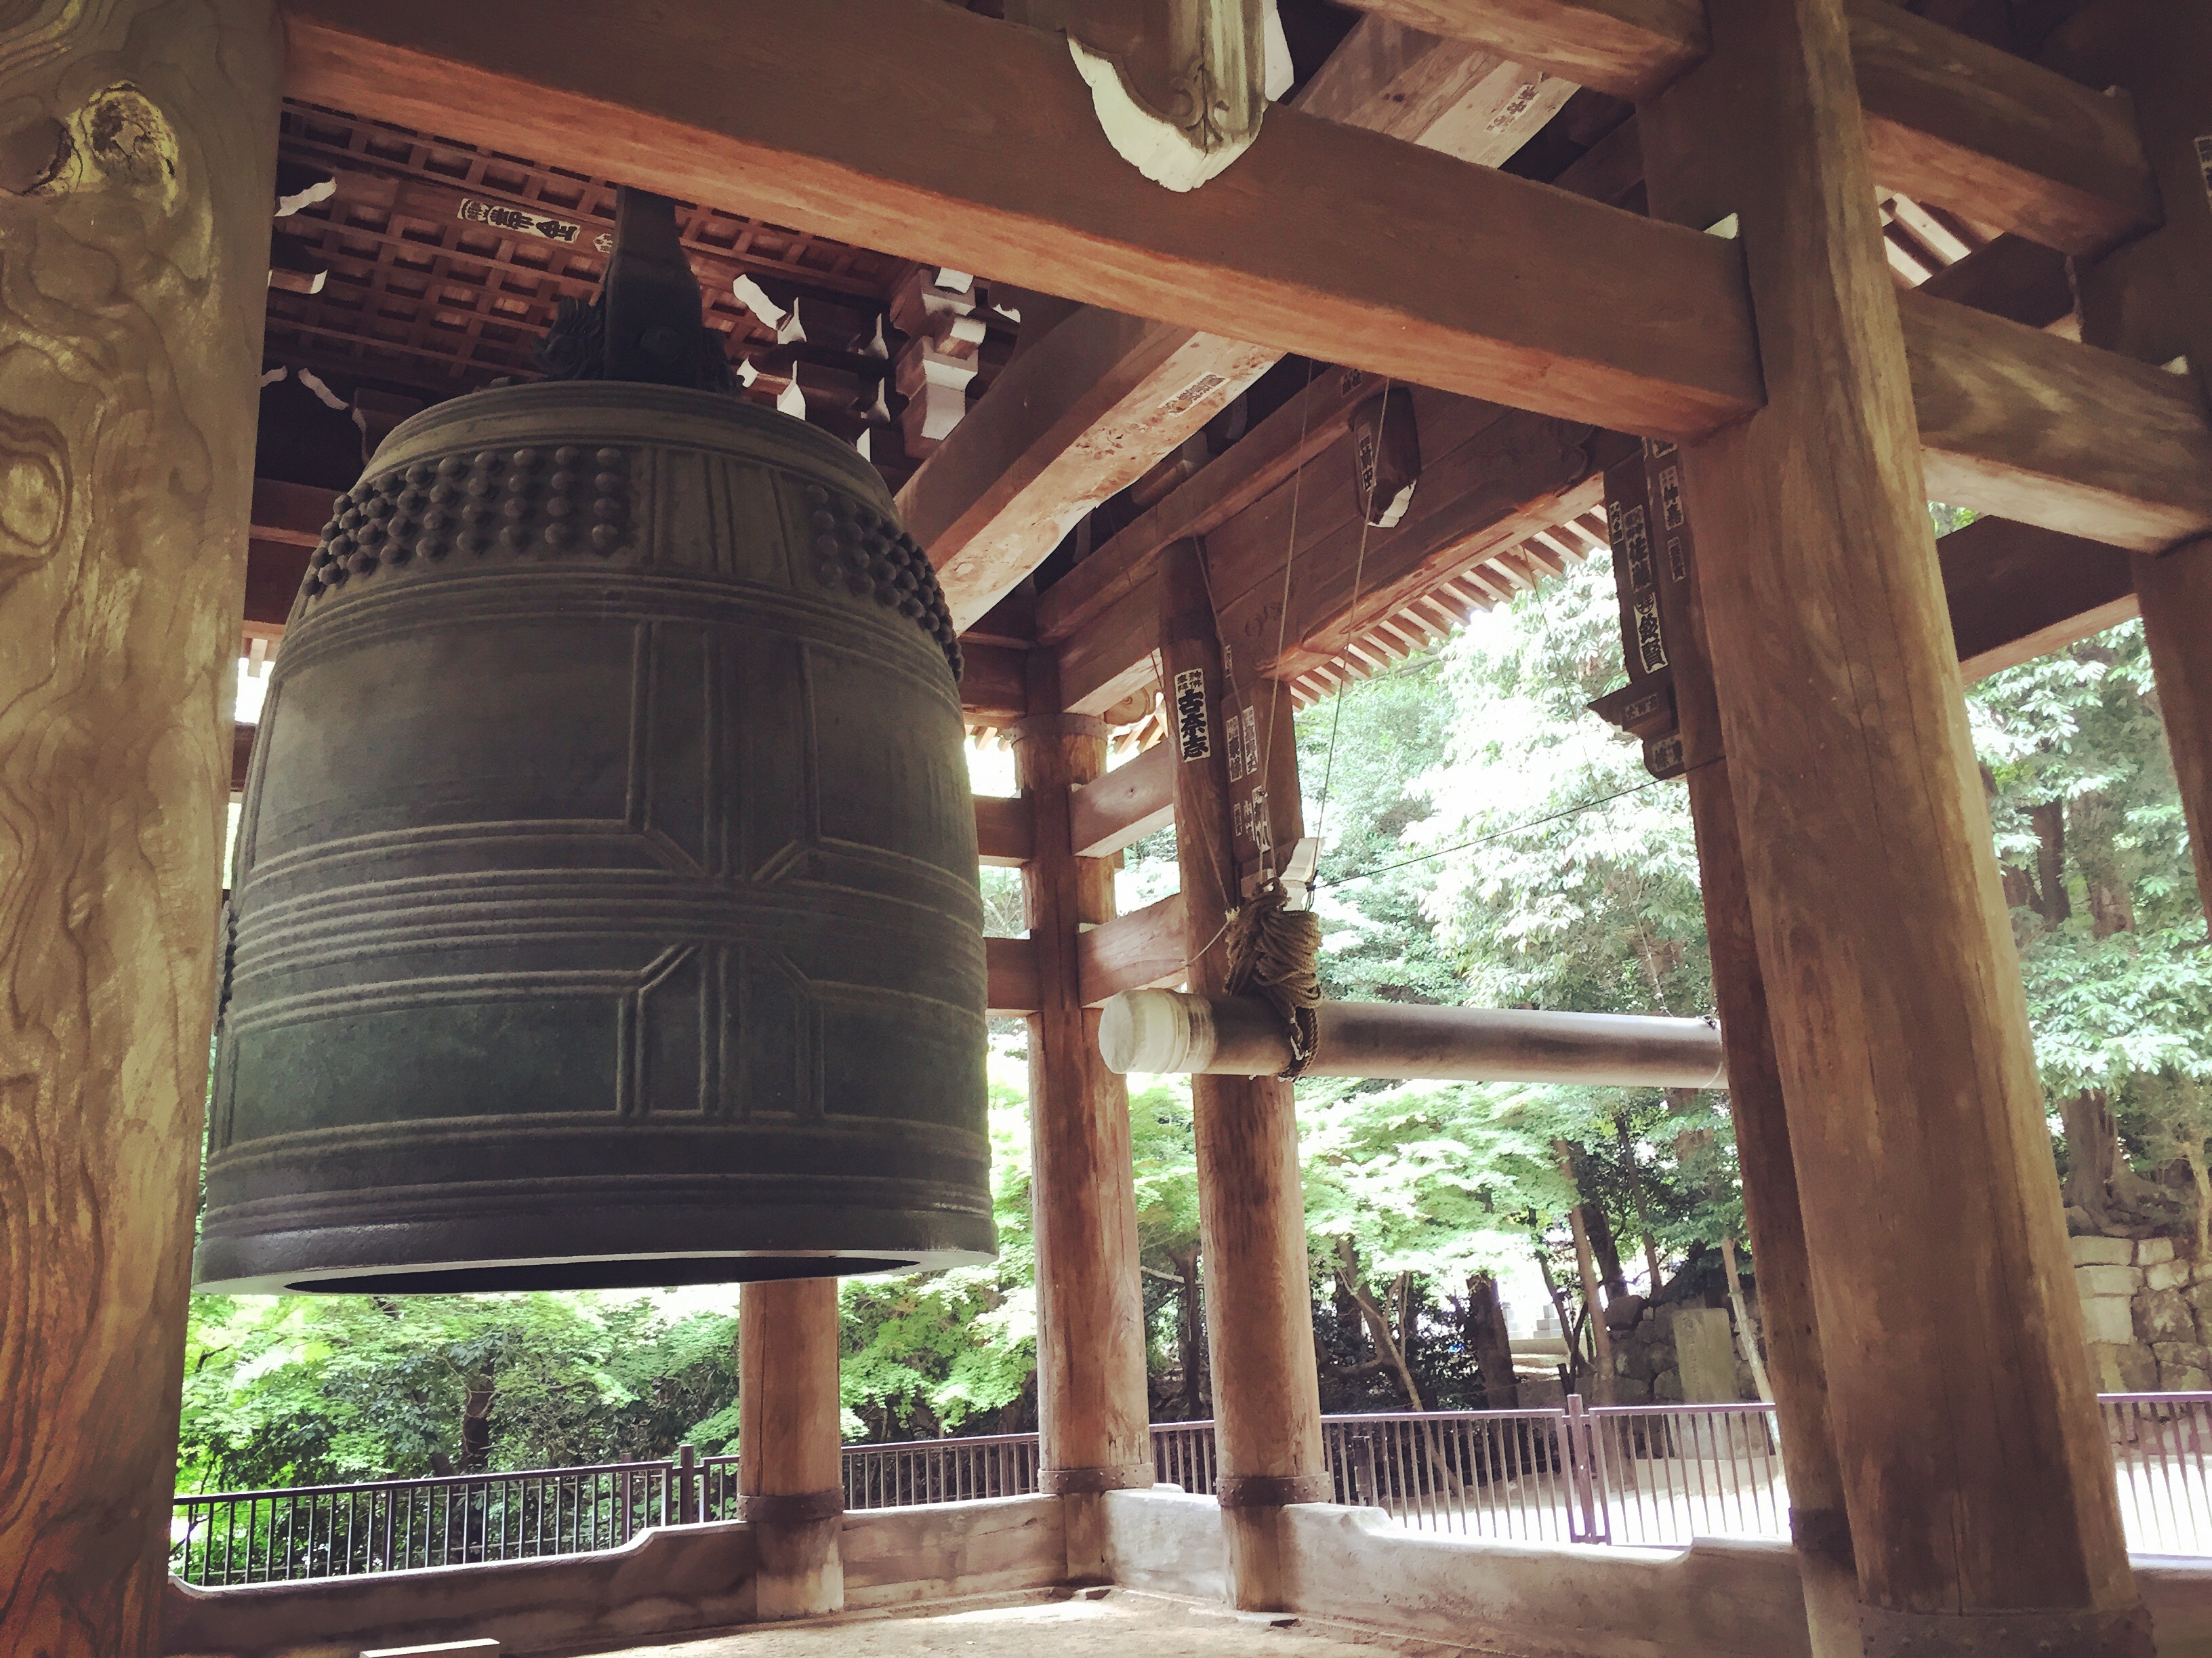 The Bell of Mindfulness